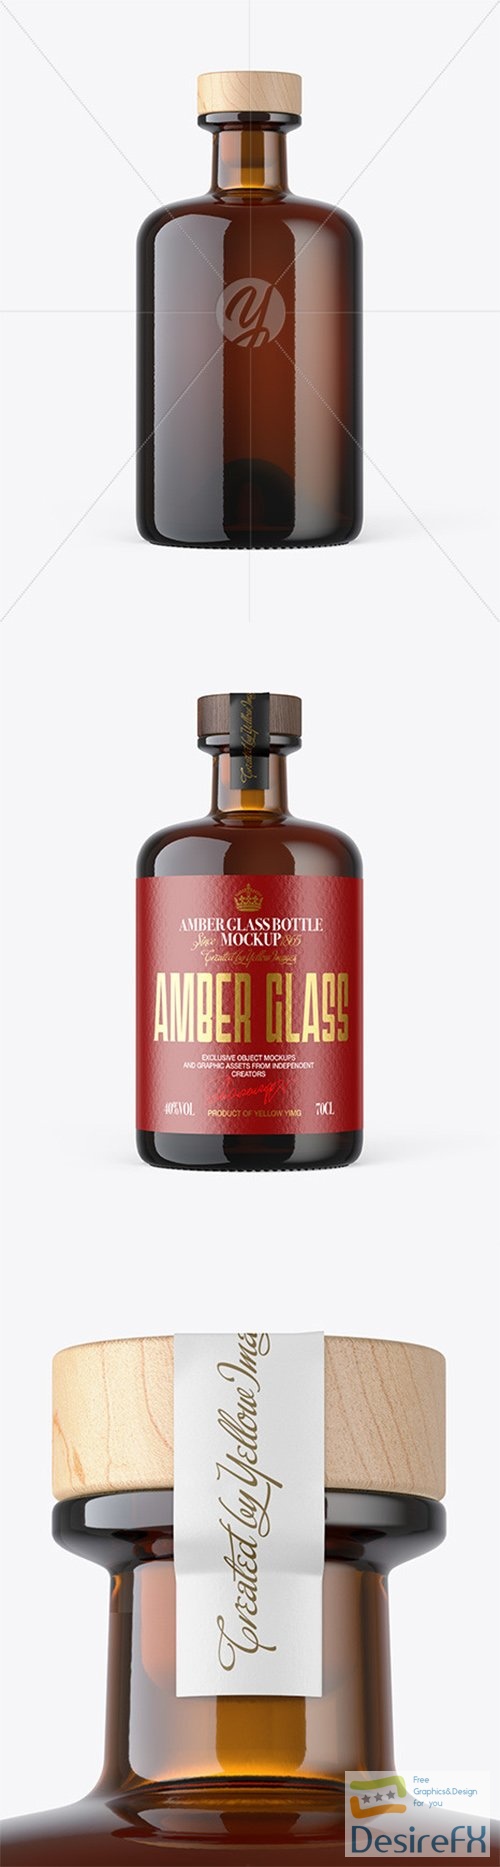 Amber Glass Bottle with Wooden Cap Mockup 79768 TIF